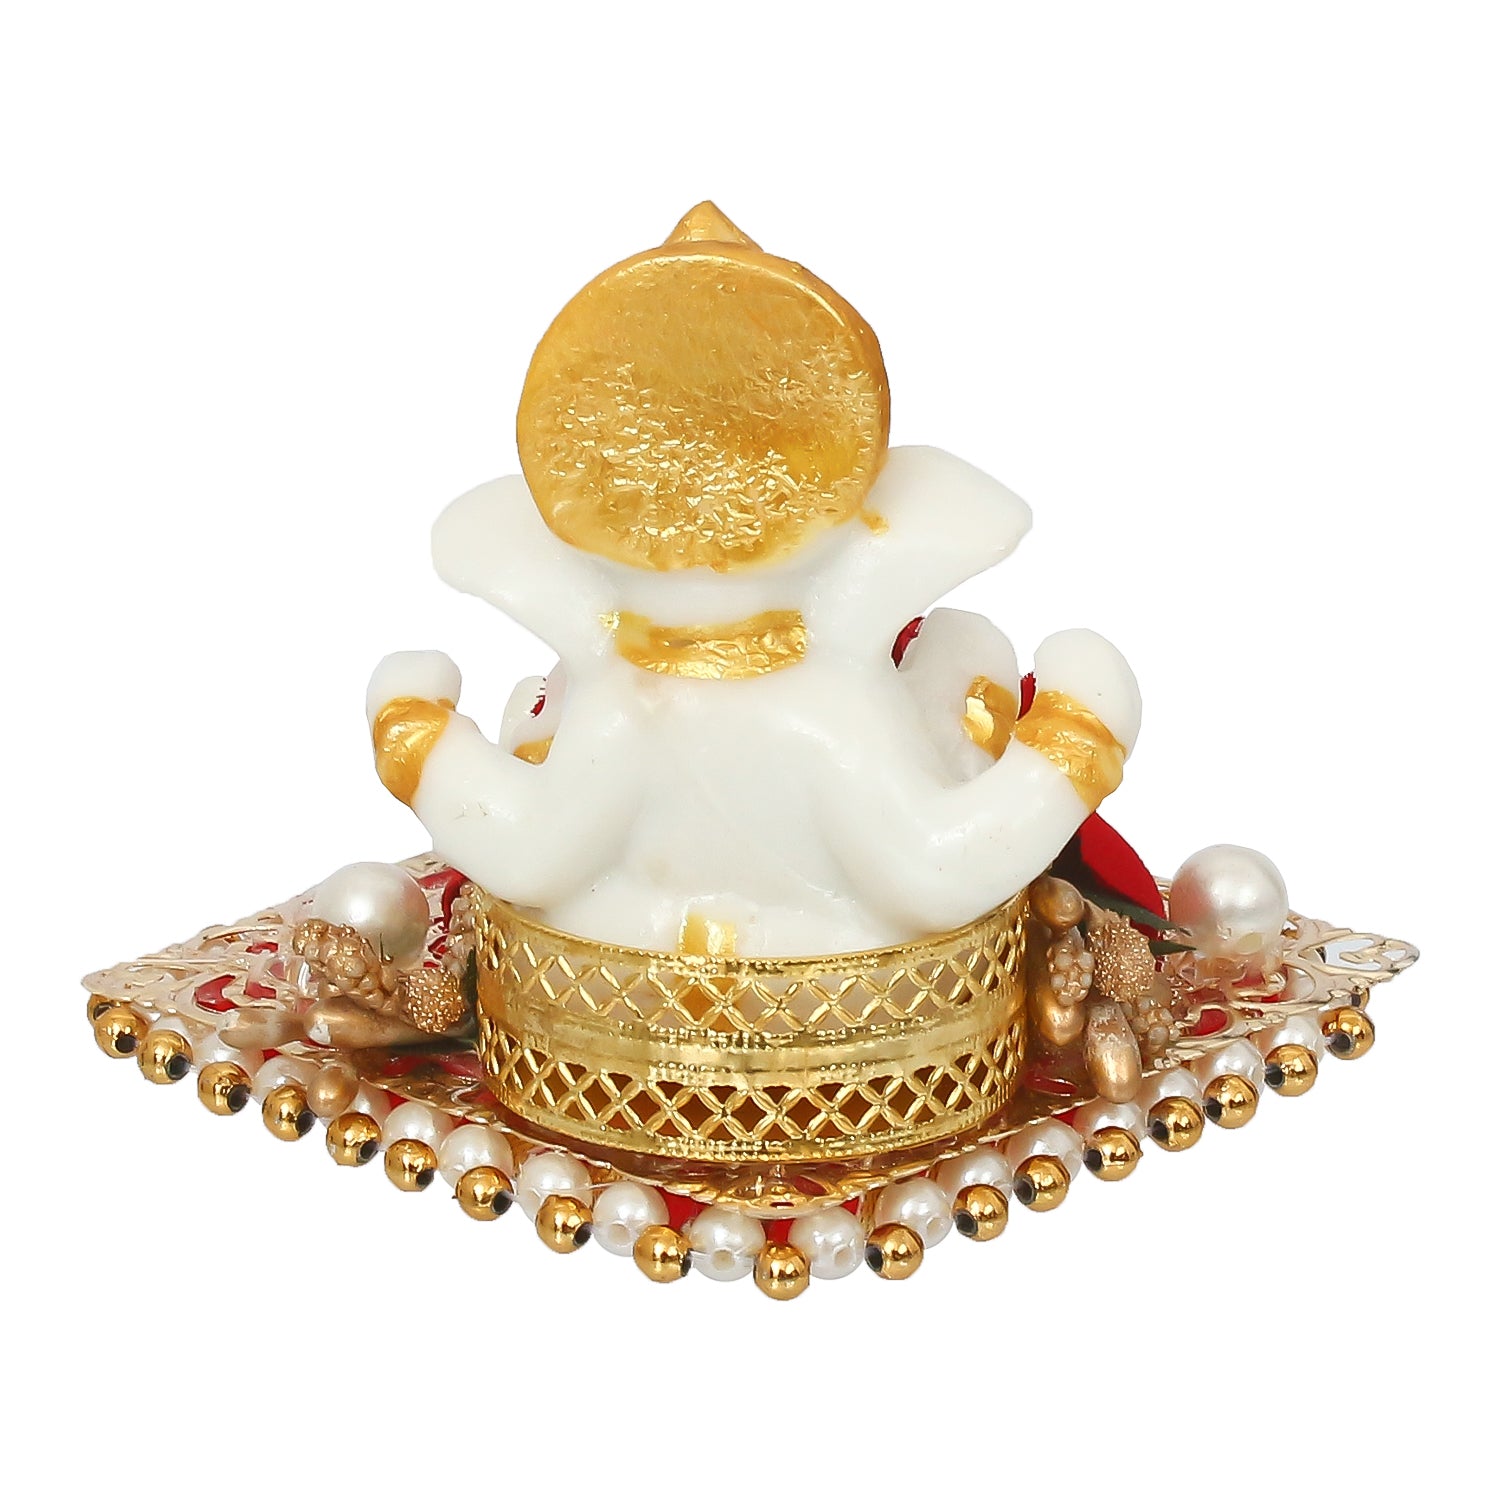 Polyresin Lord Ganesha Idol on Decorative Handcrafted Plate for Home and Car Dashboard 5